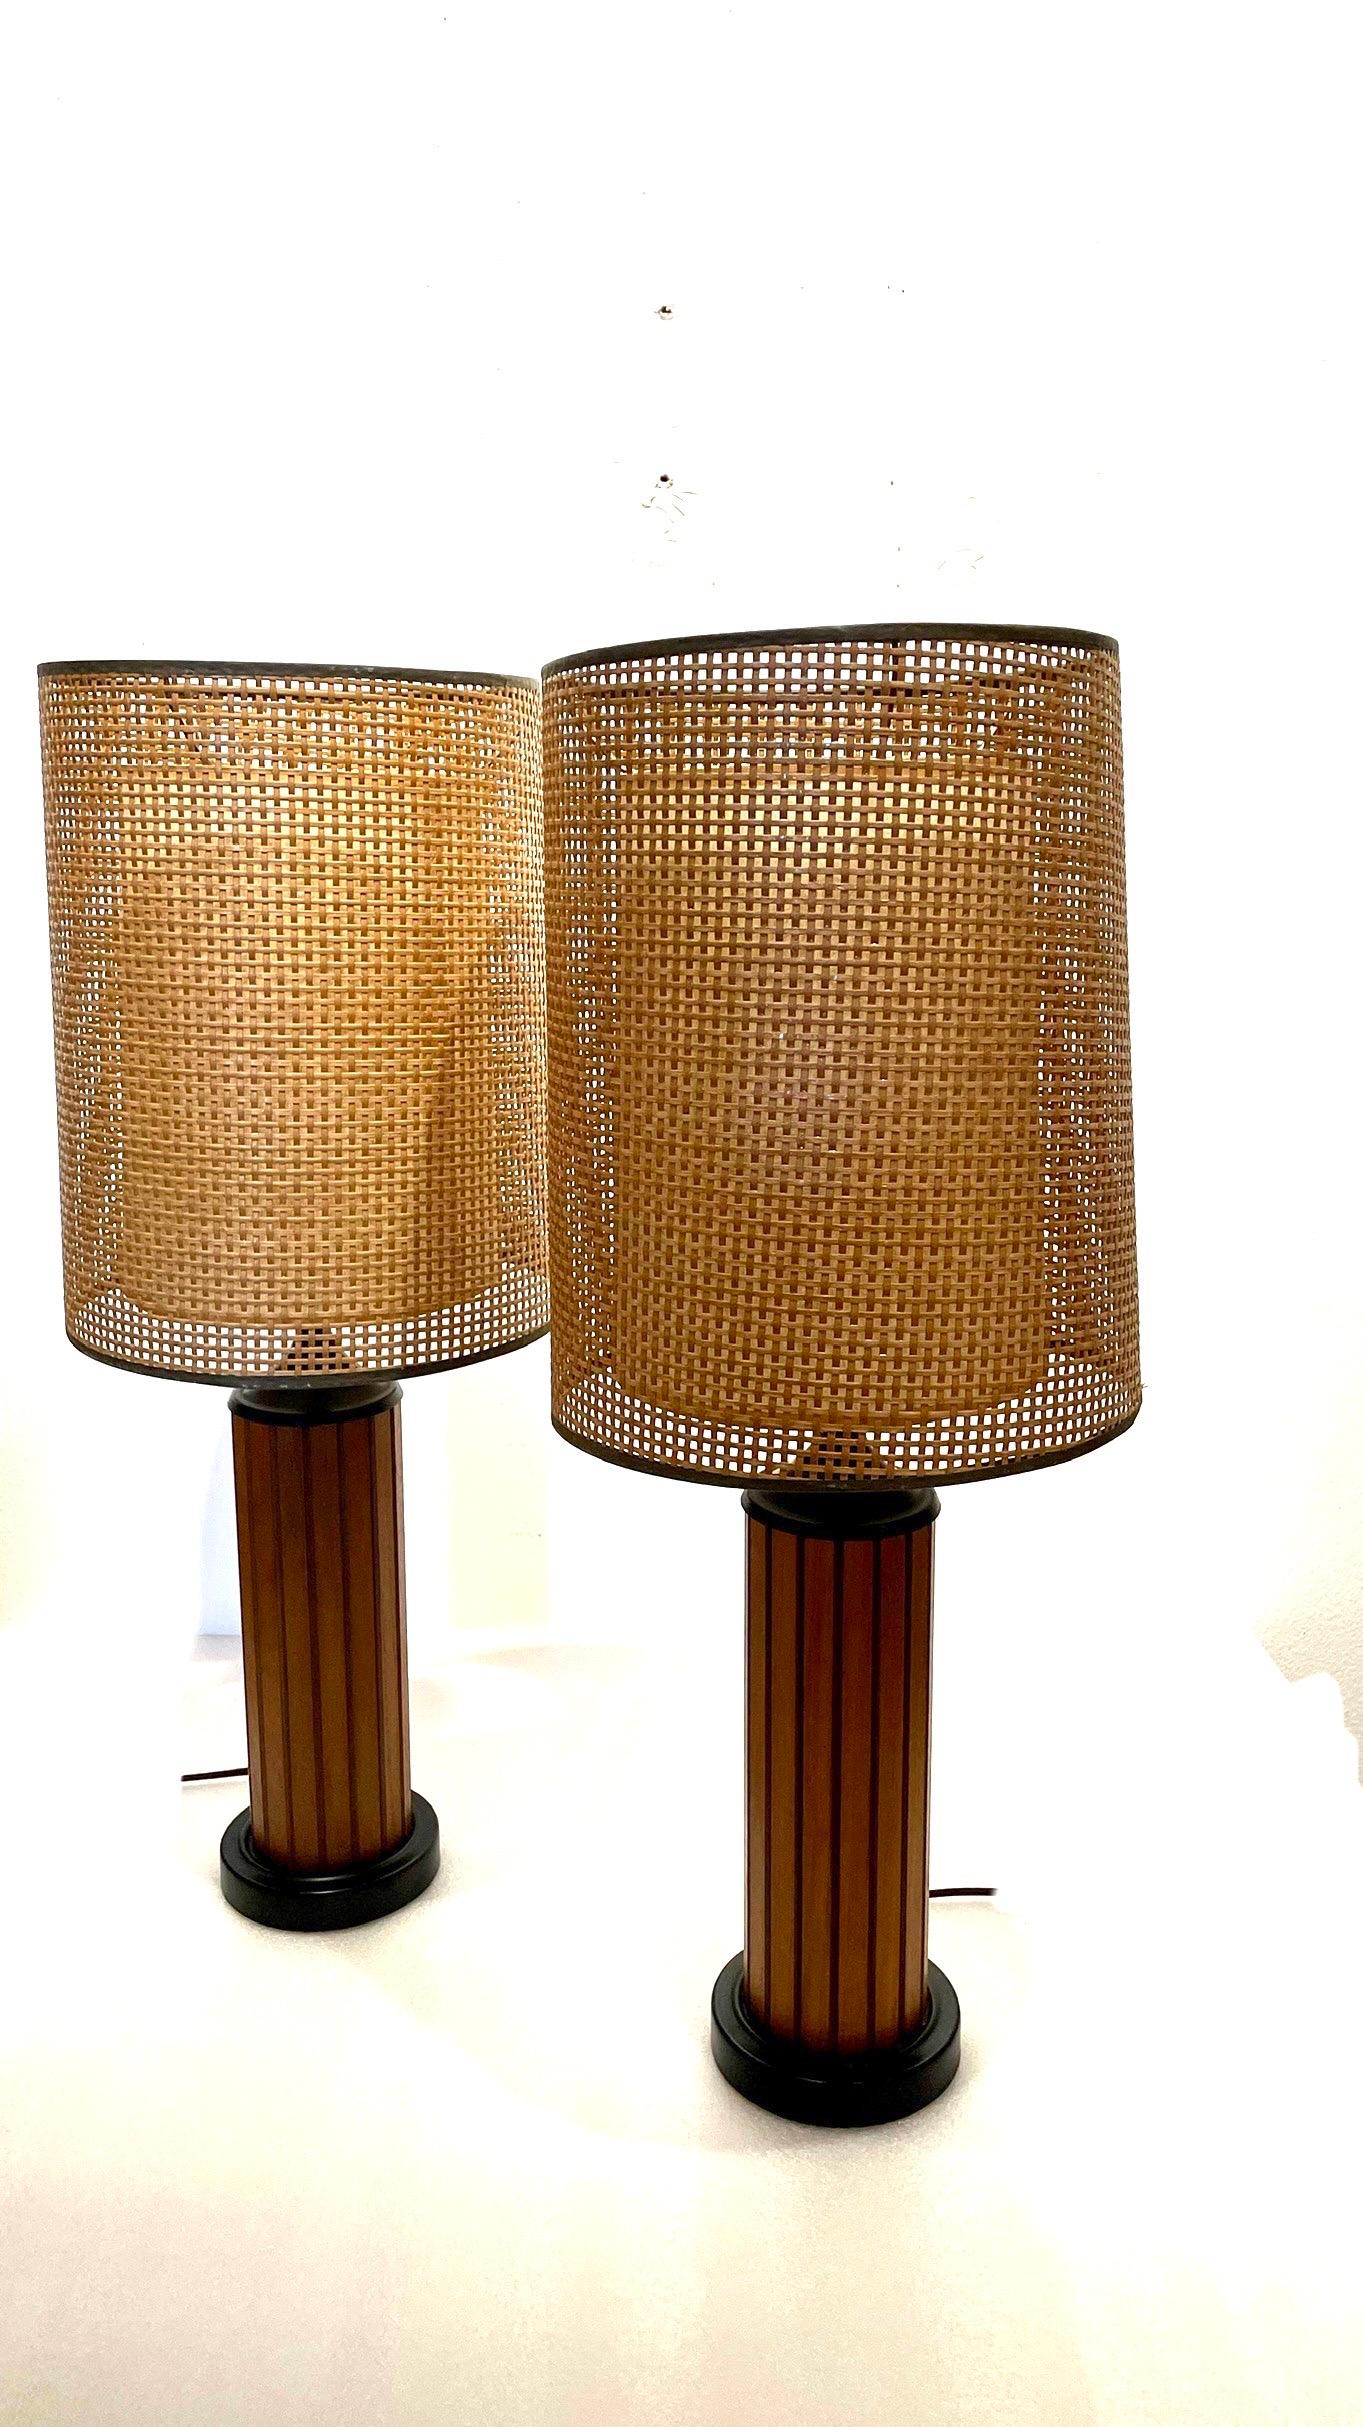 A classic American mid-century pair of table desk lamps, teak and metal base with original lampshades in cane and rice paper diffuser, in perfect working condition very light wear.